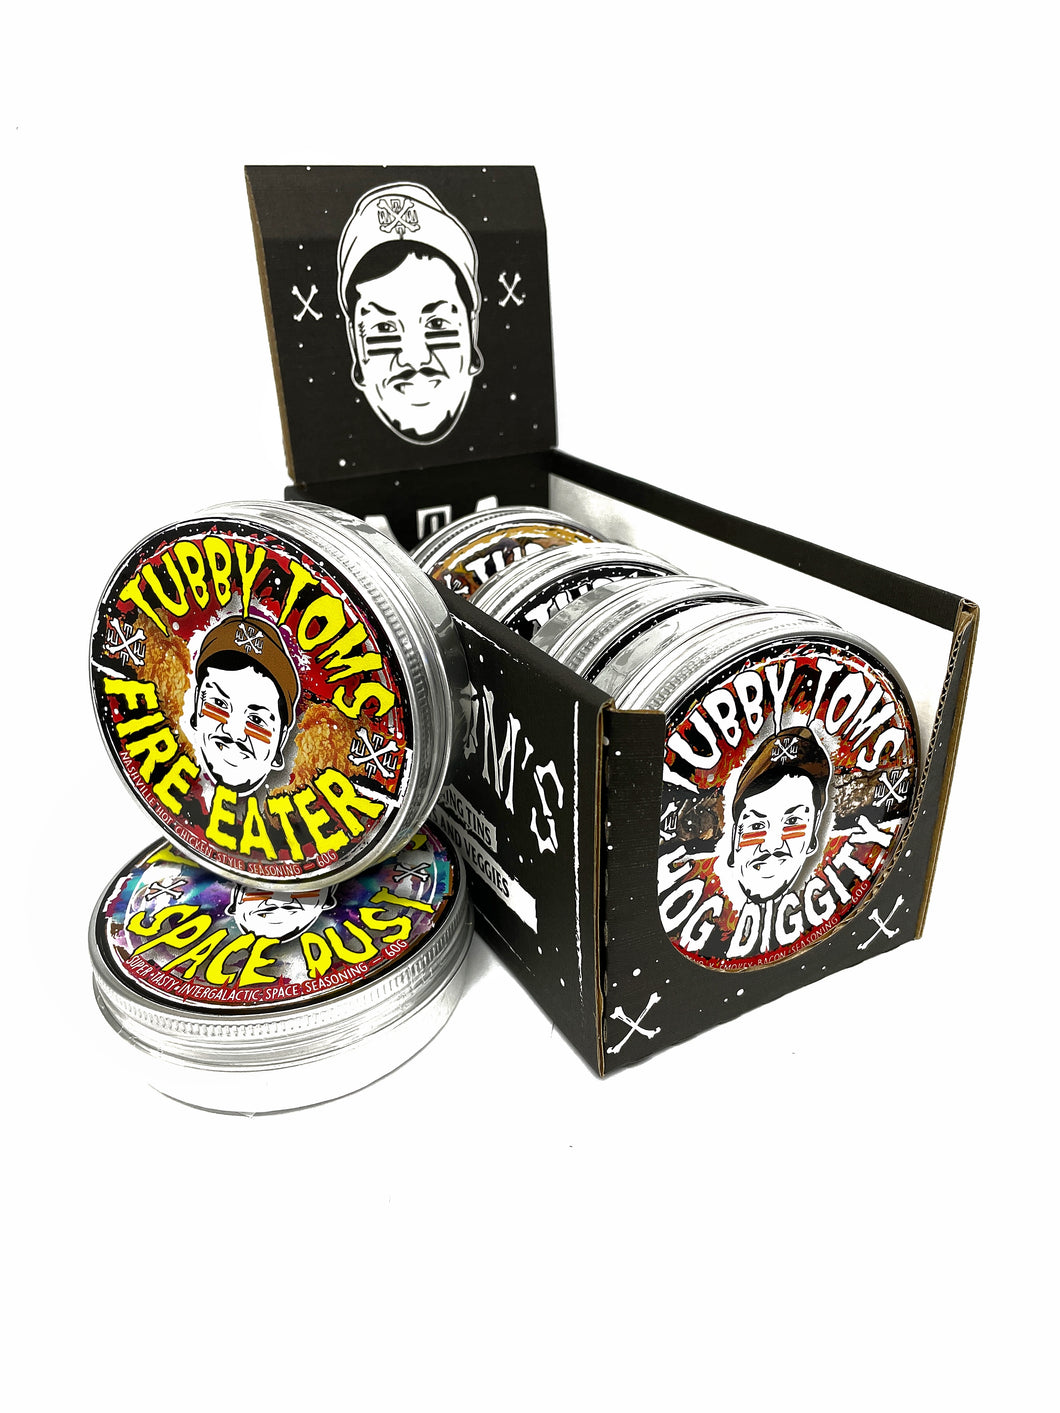 SPECIAL EDITION SEASONING TIN SET! NEW FLAVOURS IN A BOX SET!